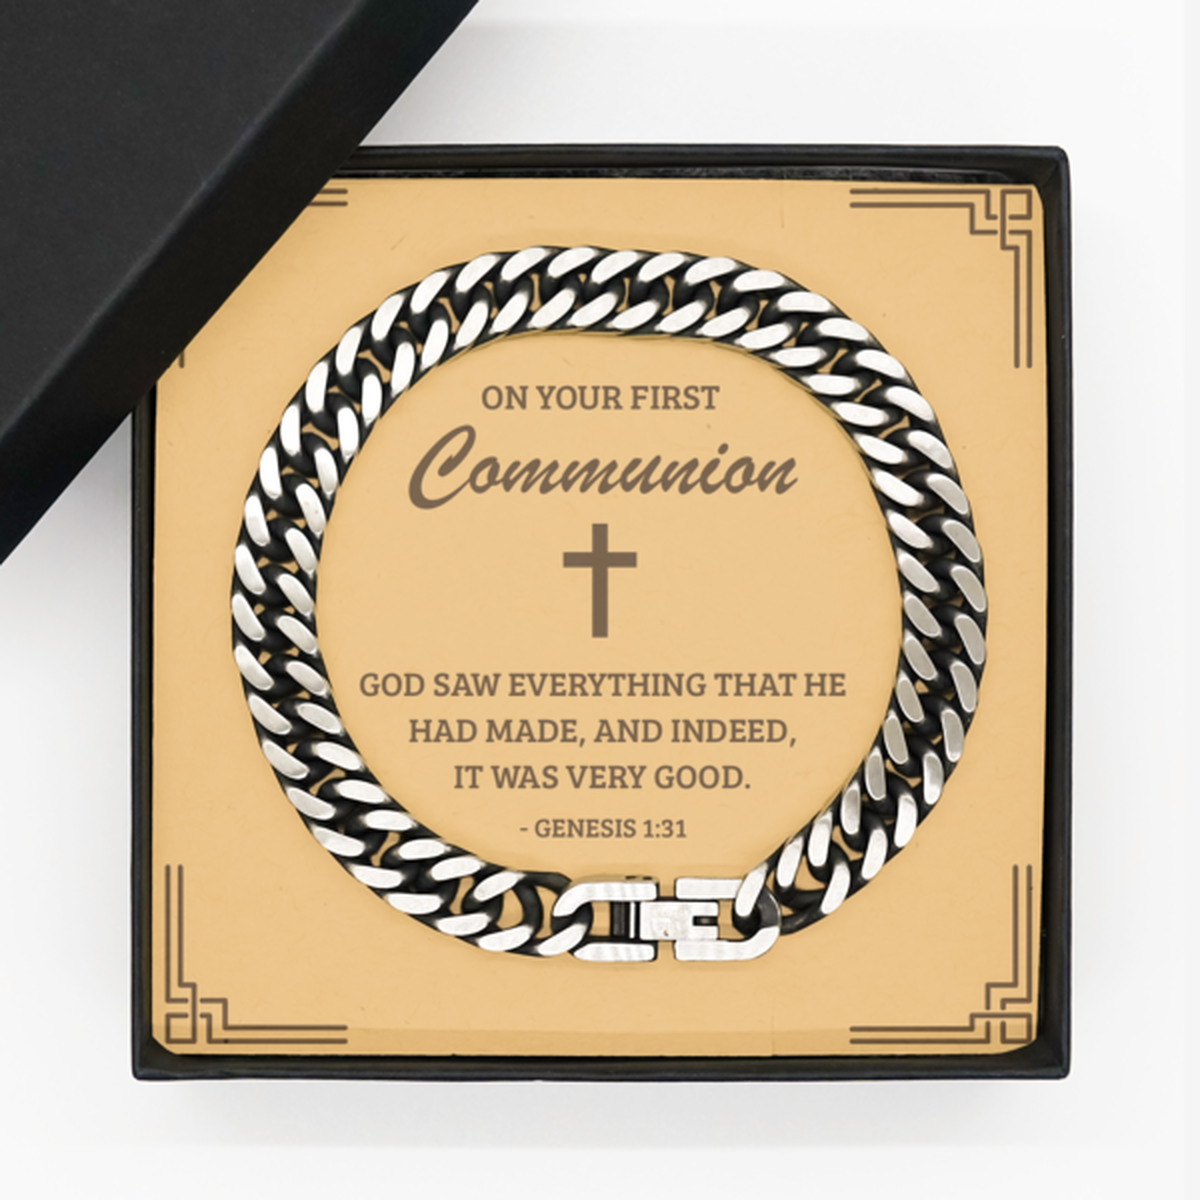 First Communion Gifts for Teenage Boys, God saw everything that he had made, Cuban Link Chain Bracelet with Bible Verse Message Card, Religious Catholic Bracelet for Son, Grandson, Dad, Godfather